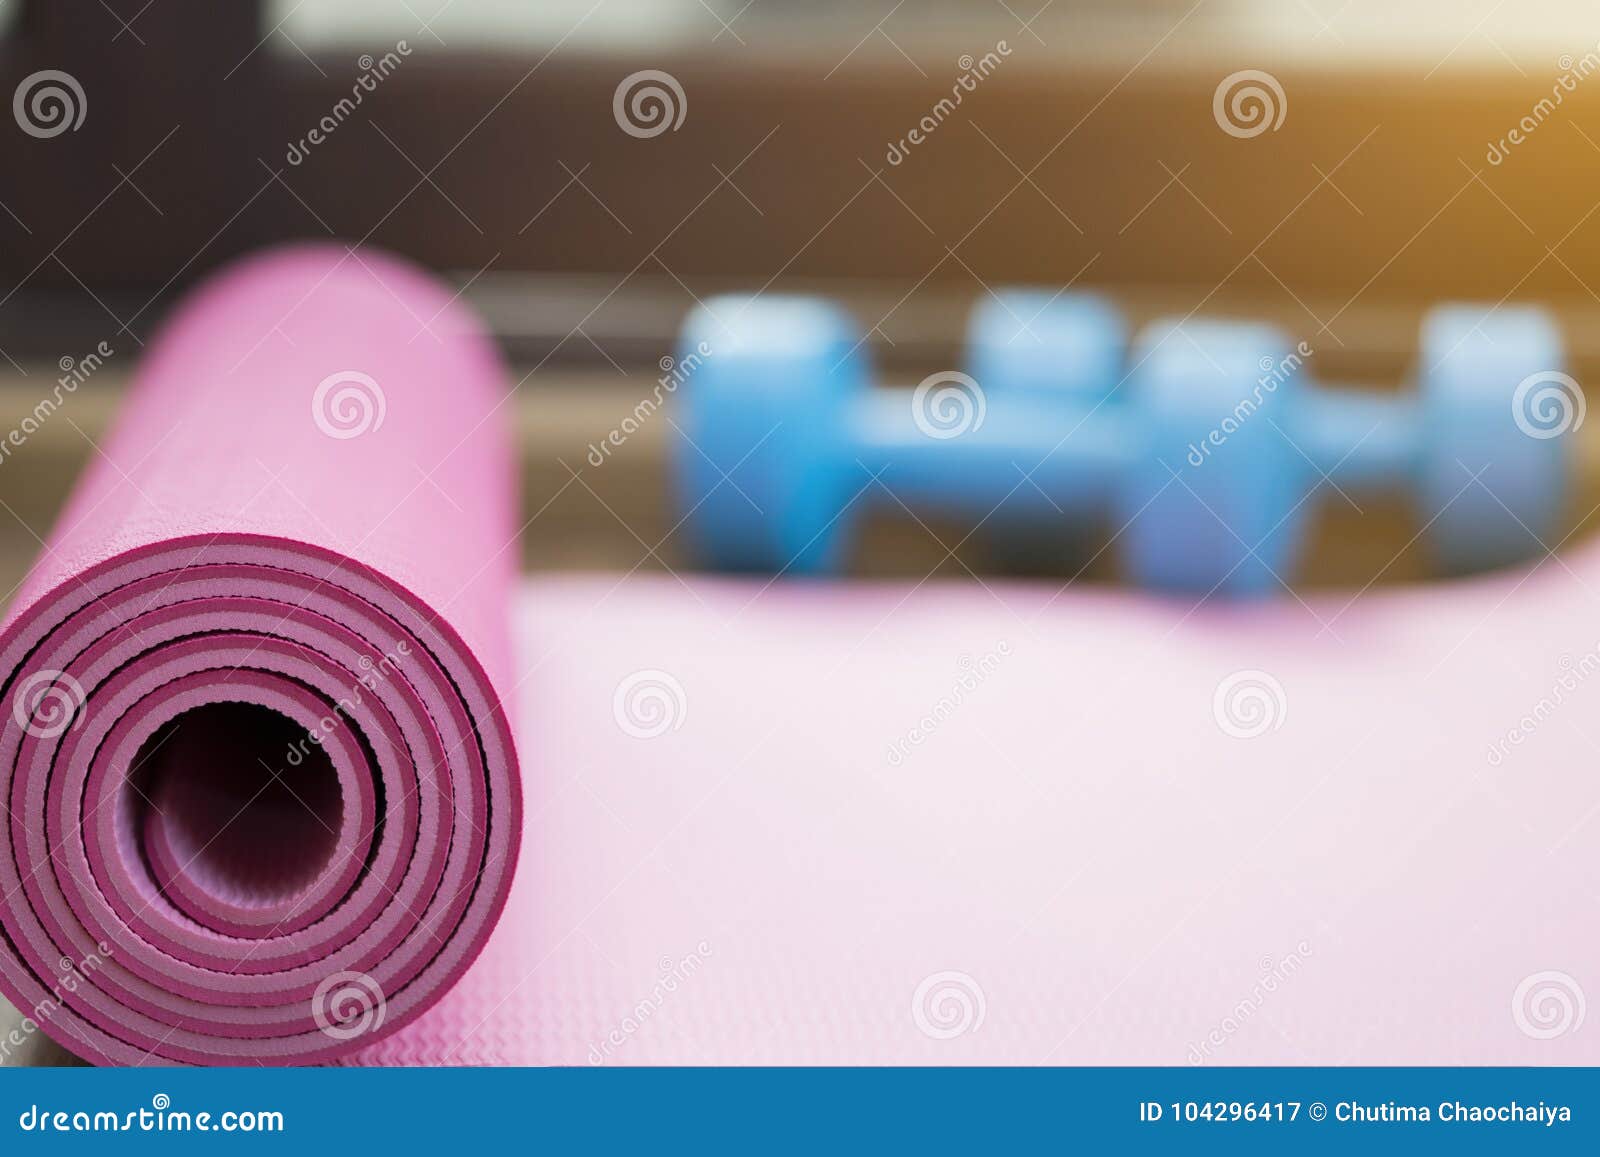 Dumbbell and Yoga Mat on Table Stock Image - Image of workout, exercise ...